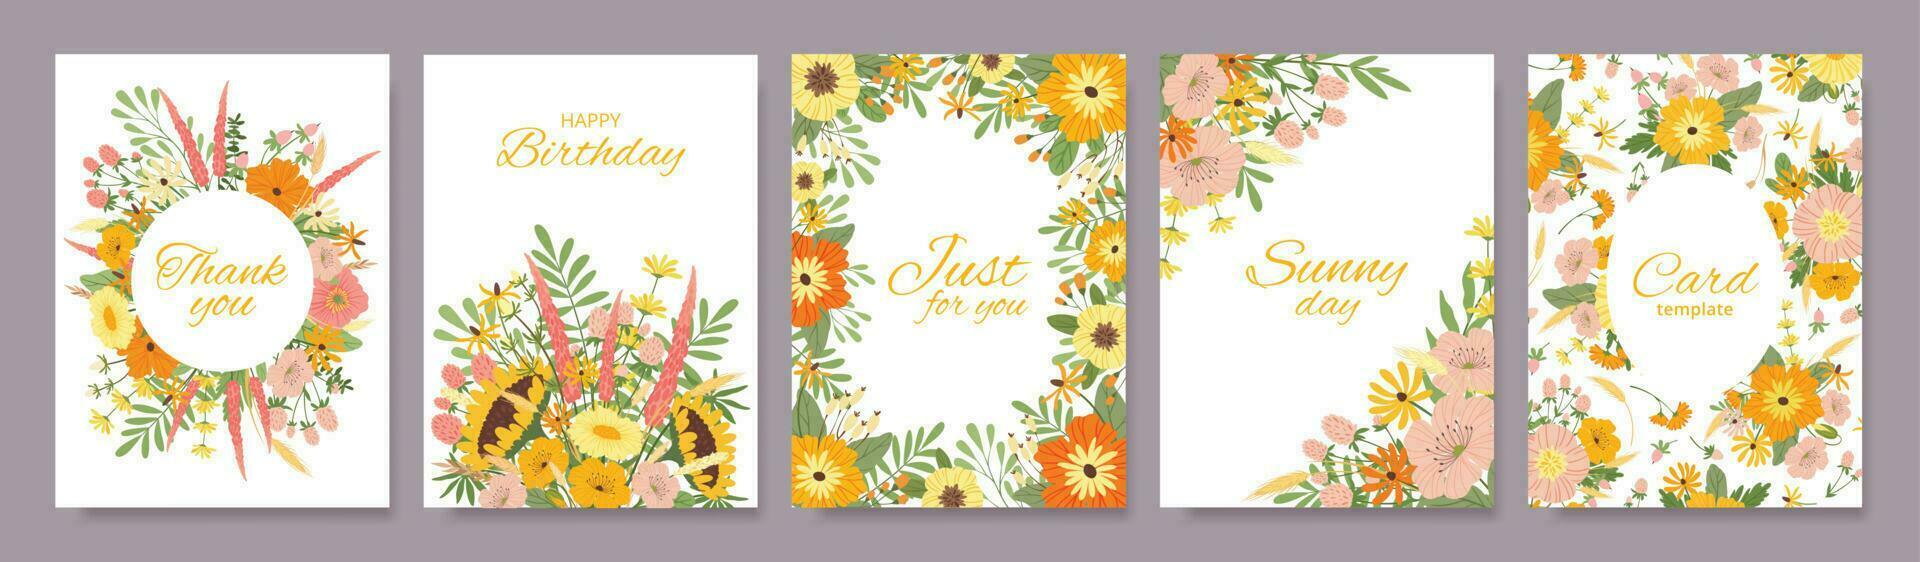 Floral greeting cards with spring blossom flowers, botanical pattern card. Wildflowers background birthday invite, poster template vector set